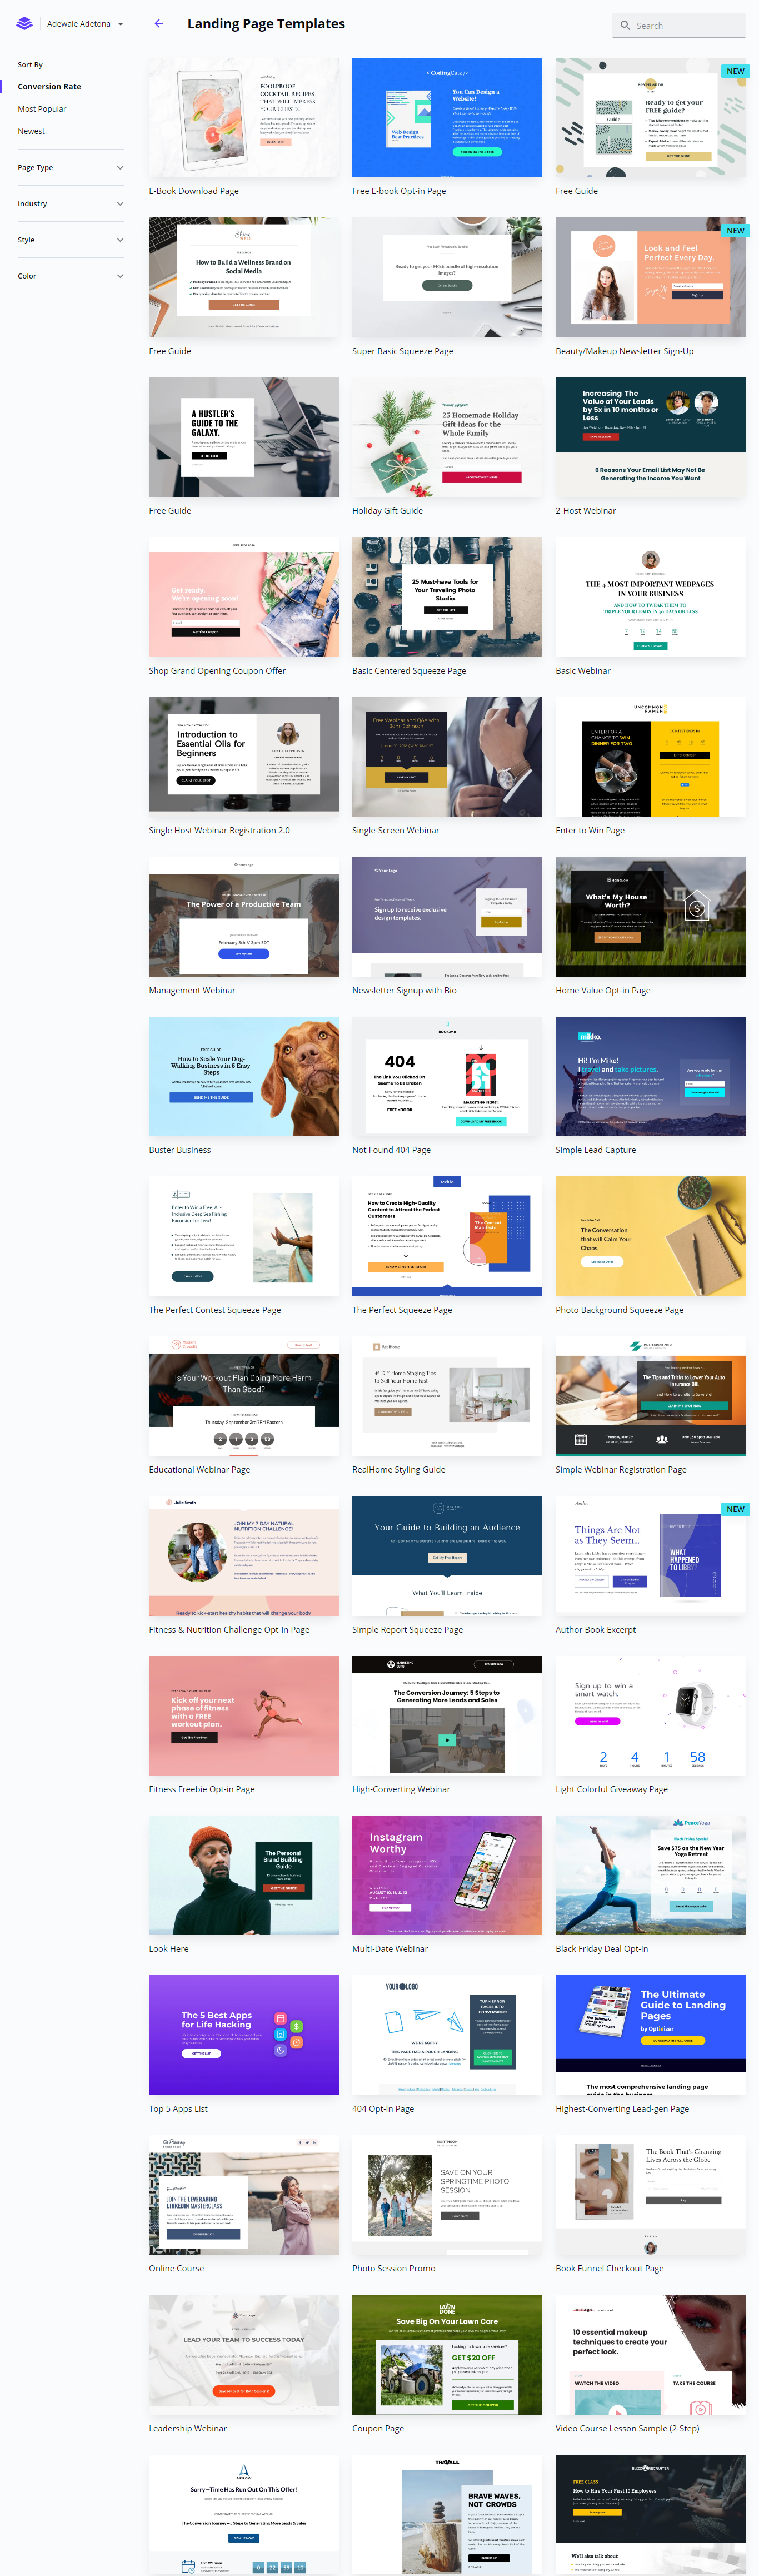 Leadpages Landing Pages Design